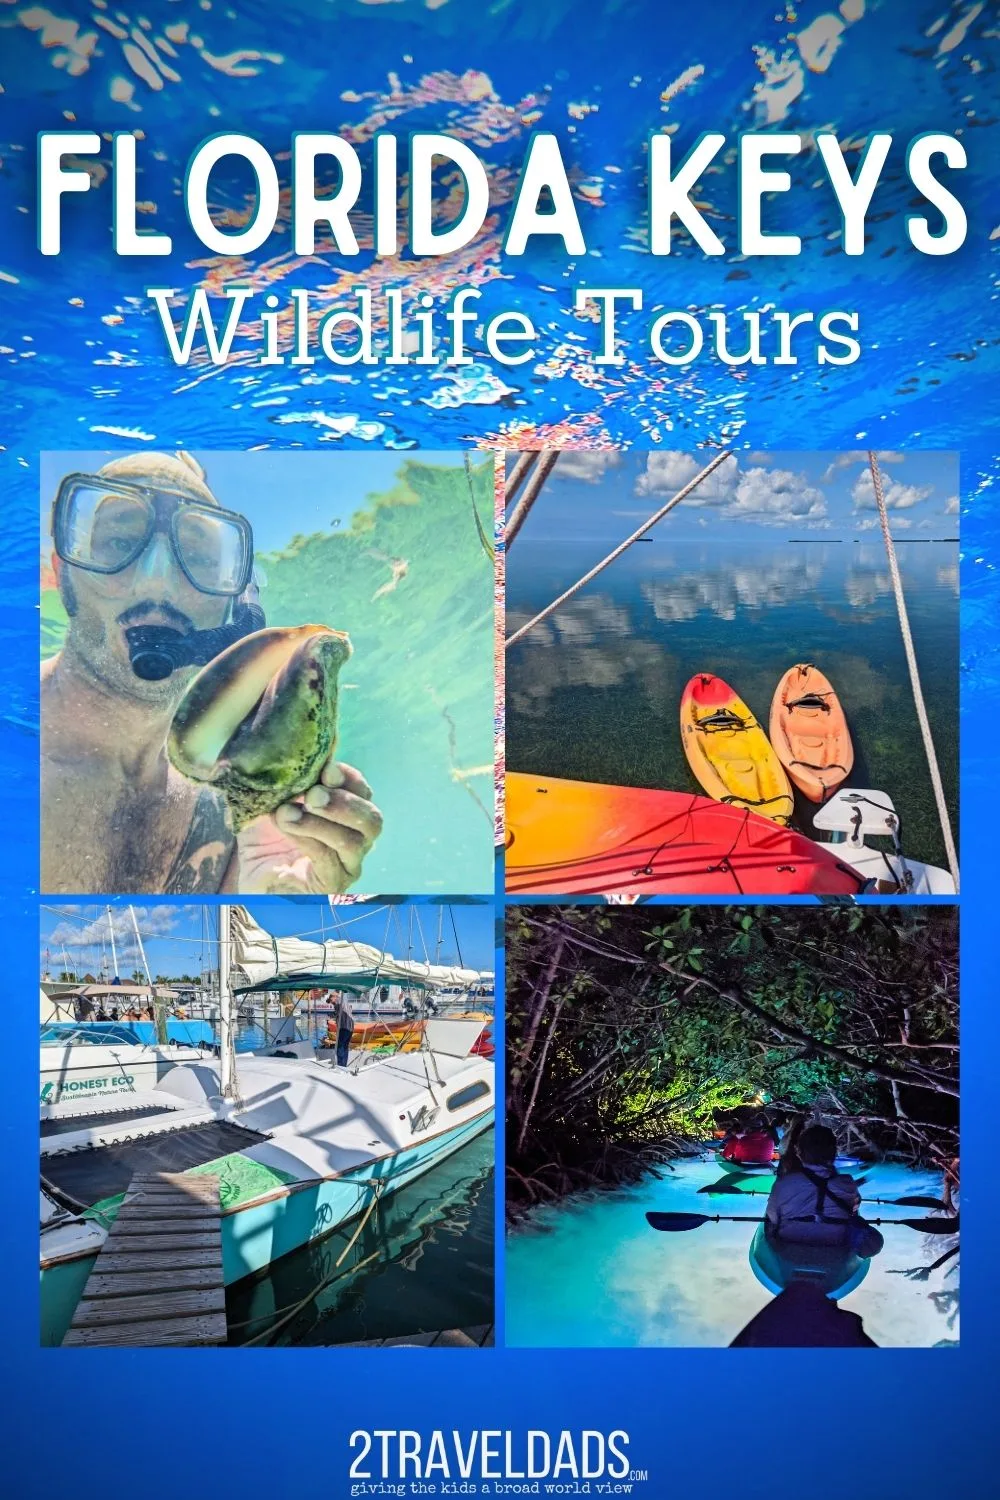 There are lots of great wildlife tours in the Florida Keys, for everything from seeing dolphins to diving at beautiful reefs. We've picked our favorite wildlife tours including kayaking, sailing and catamarans to help visitors plan great experiences.